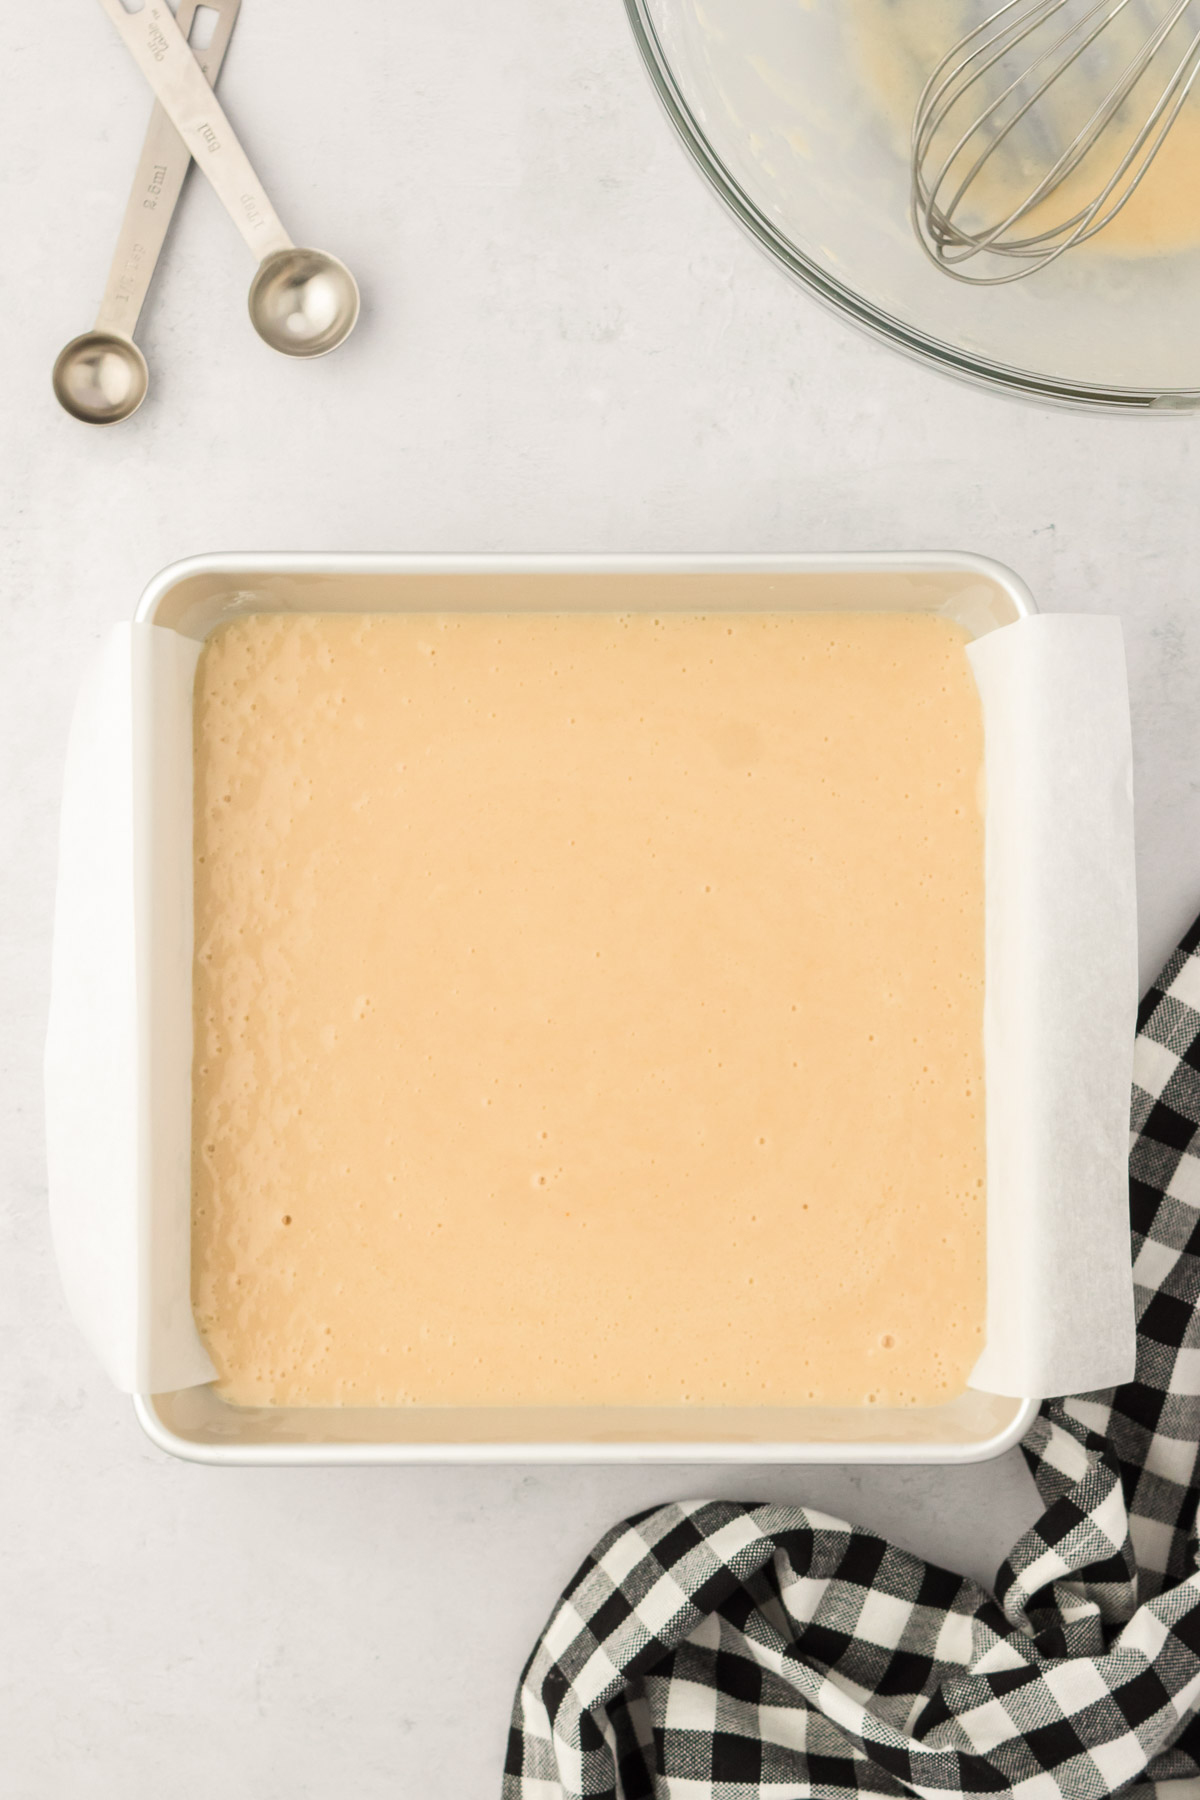 Cake batter in a square parchment lined pan.